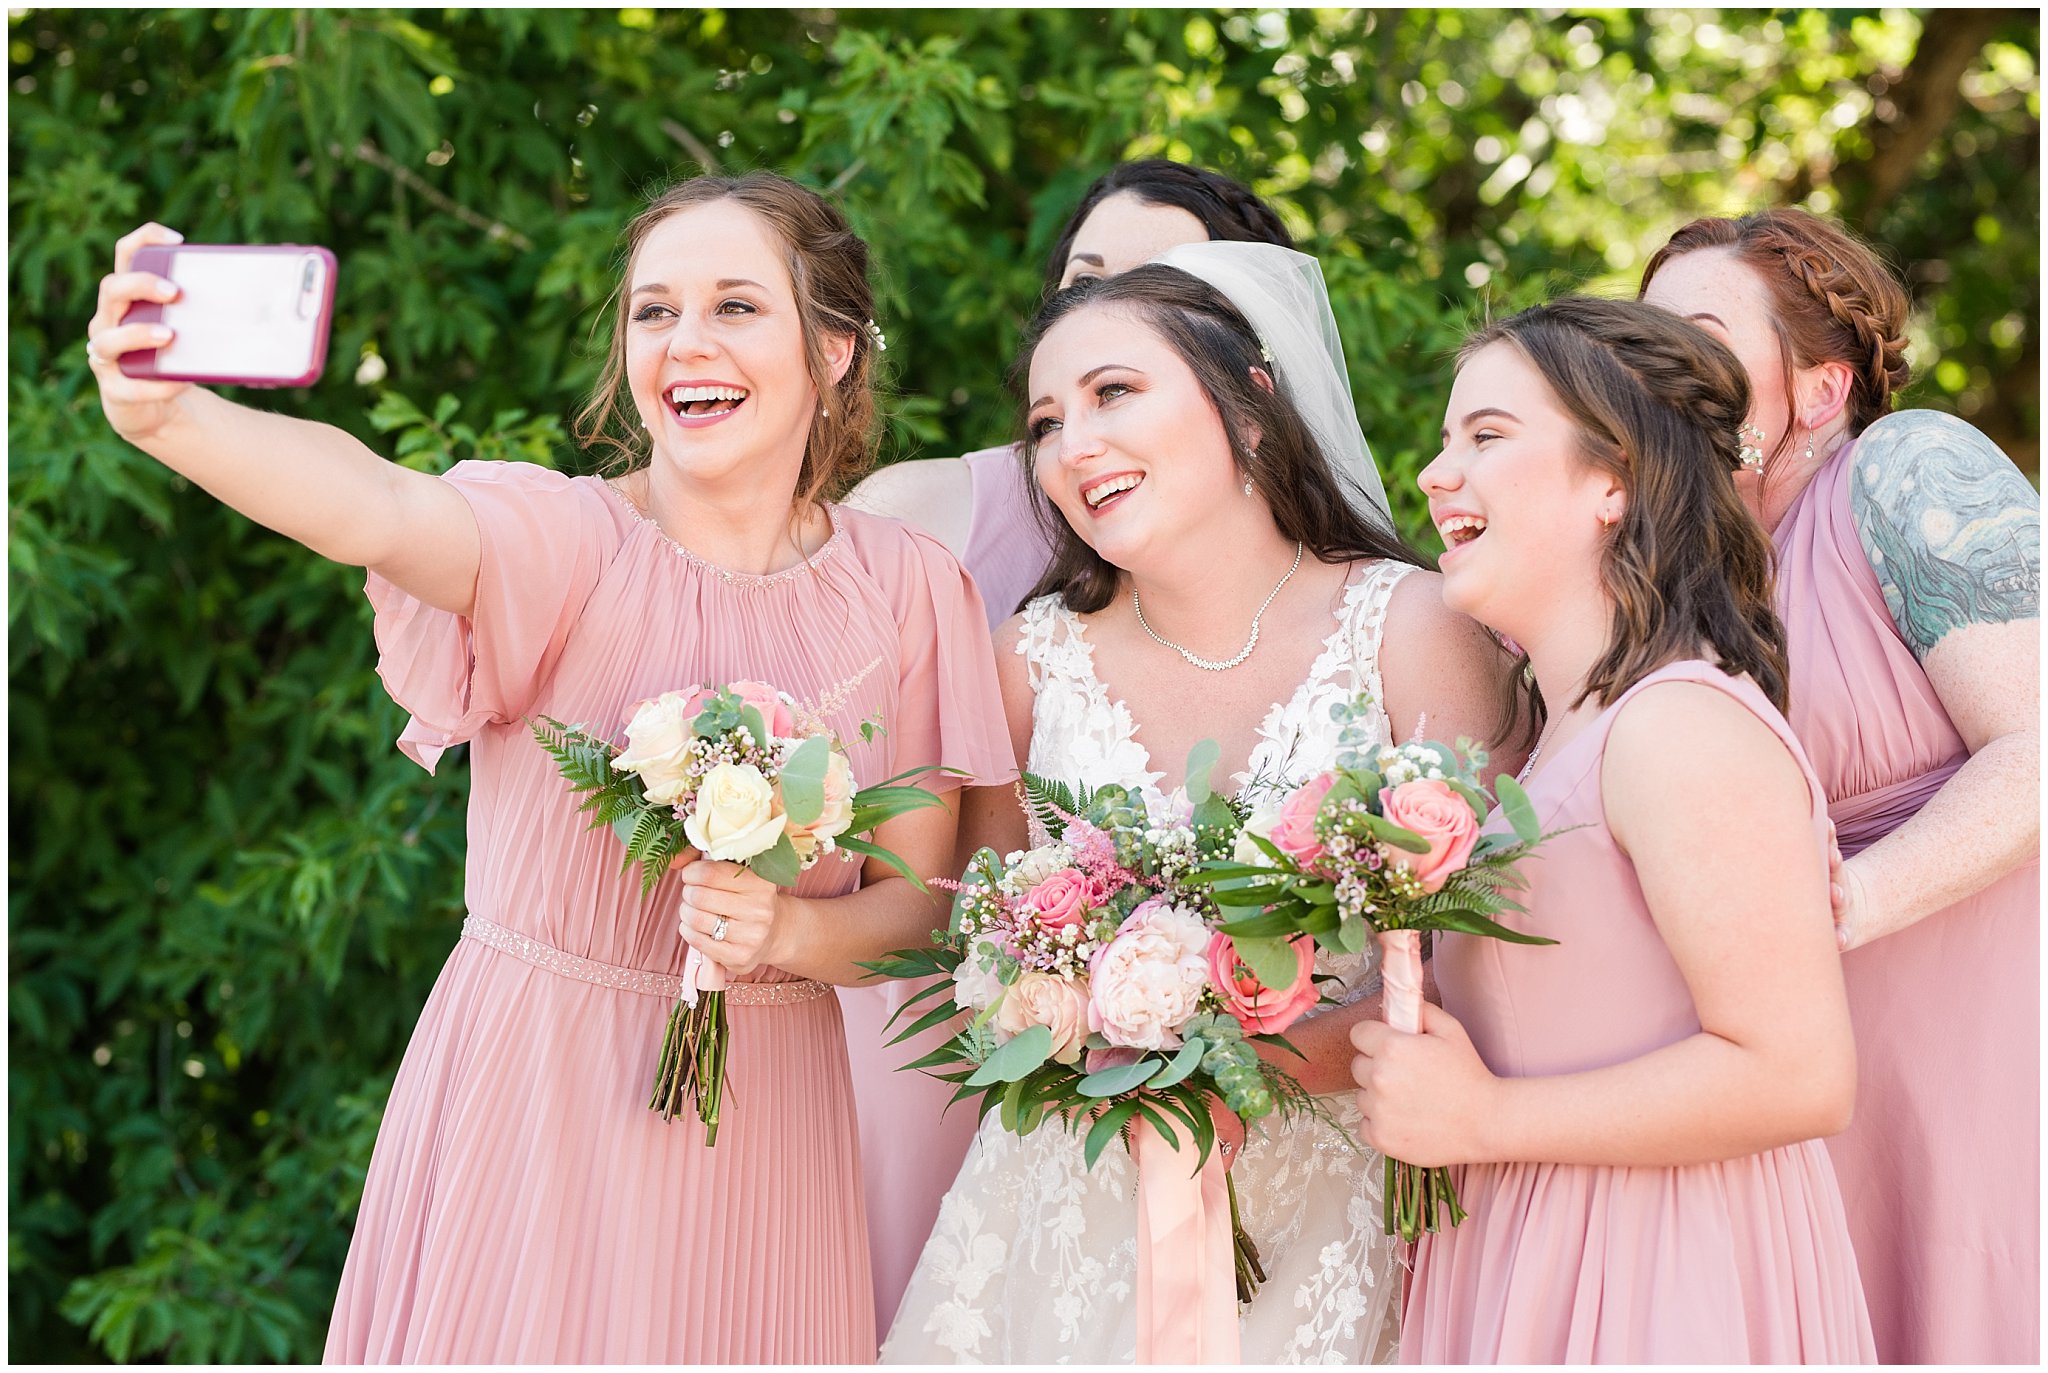 Bride and bridesmaids take selfie in blush dusty rose dresses with green white and blush florals | Oak Hills Utah Dusty Rose and Gray Summer Wedding | Jessie and Dallin Photography